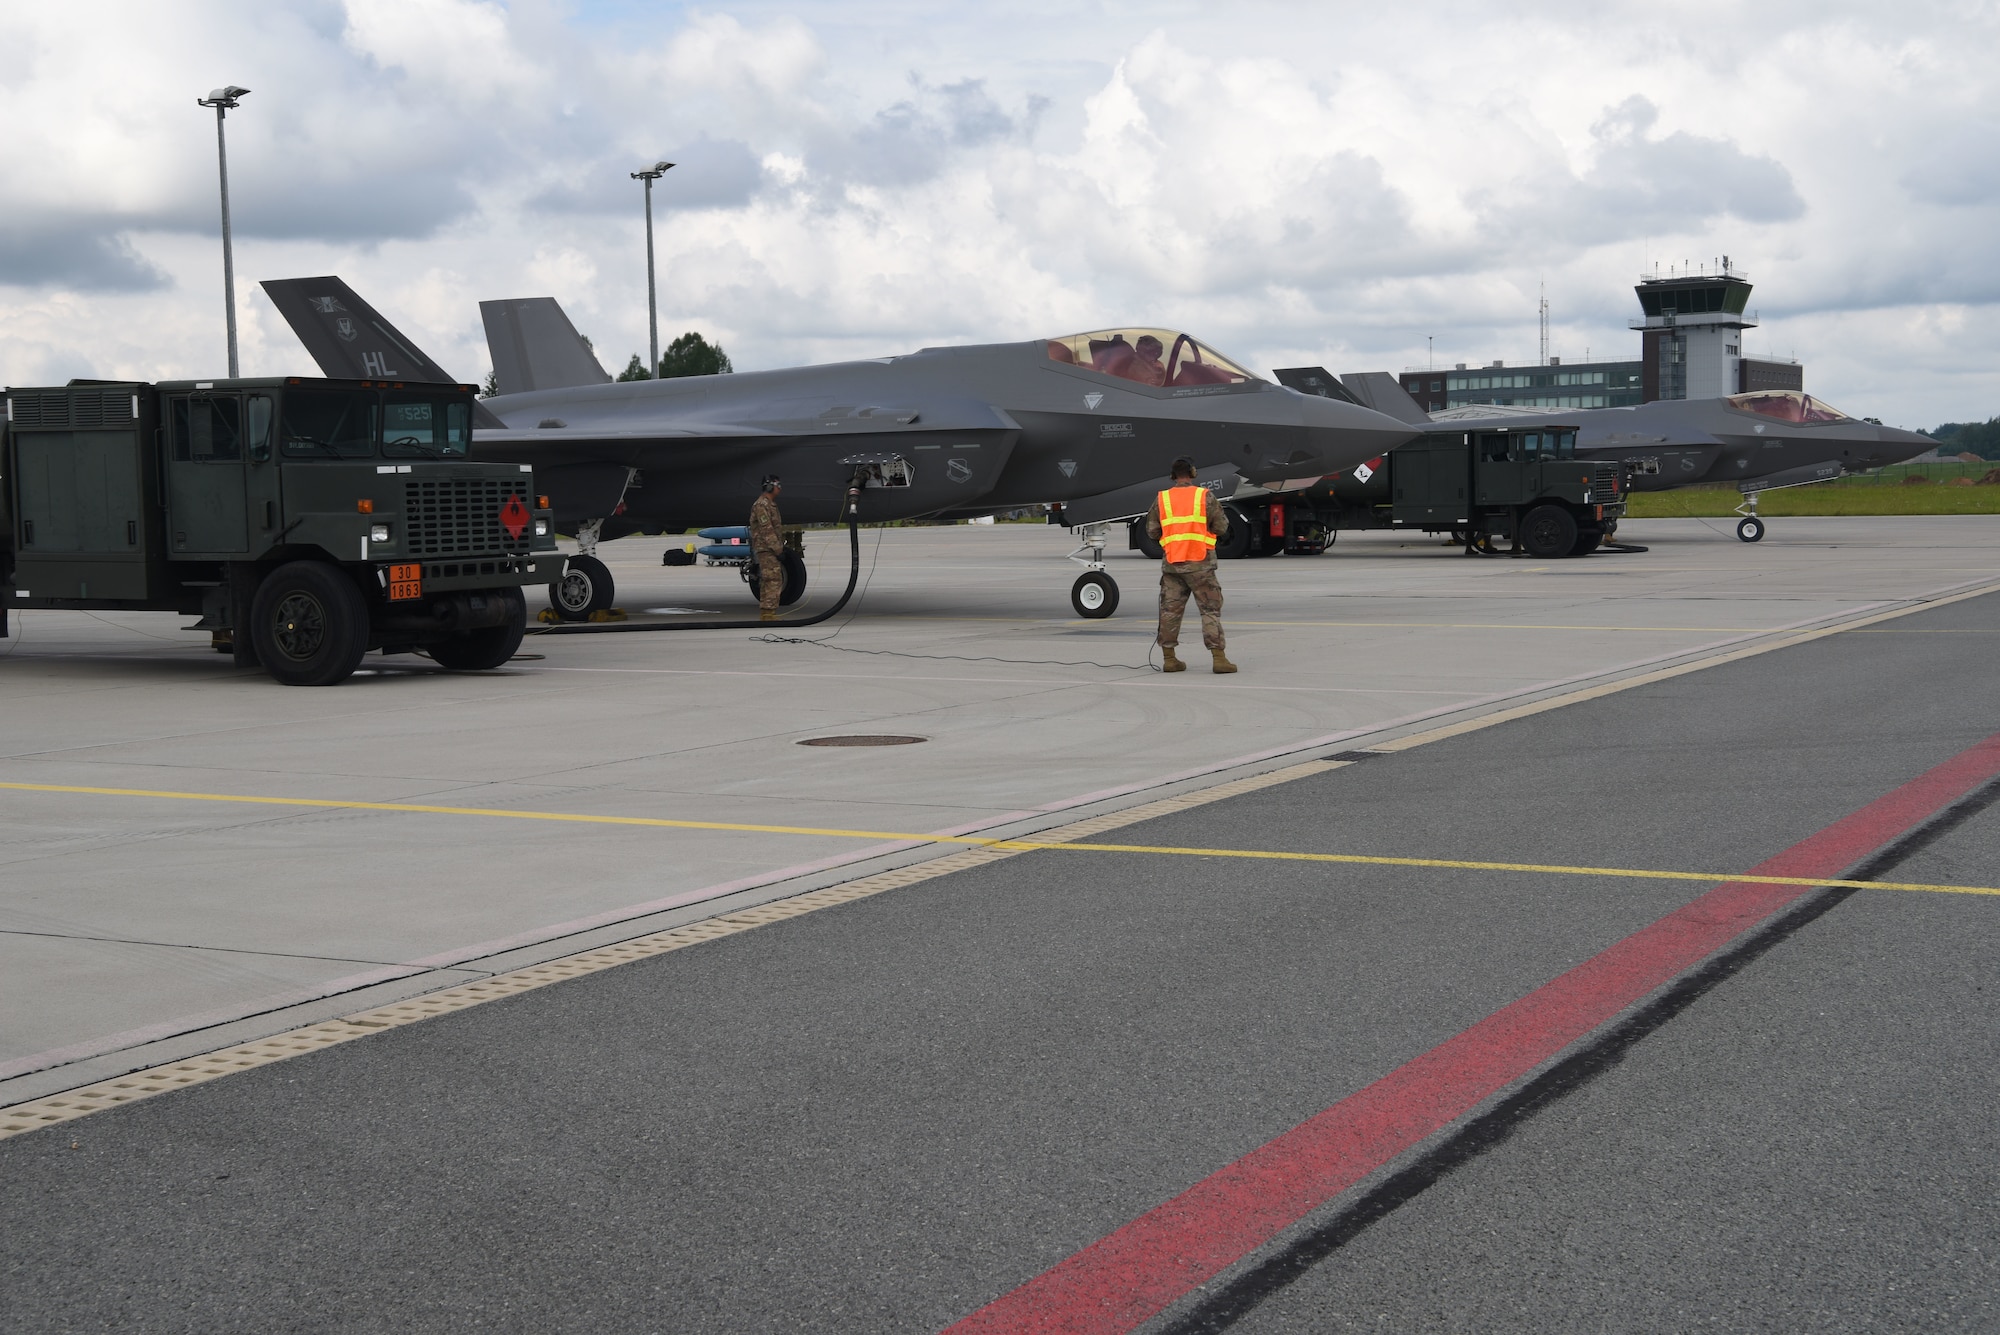 A U.S. Air Force F-35A Lightning II fighter jet deployed from the 388th and 419th Fighter Wings, Hill Air Force Base, Utah, conducts a hot pit refueling during Operation Rapid Forge at Lielvarde Air Base, Latvia, July, 23, 2019. This is the first time a U.S. Air Force F-35 Lightning II stealth fighter has landed in Latvia. Operation Rapid Forge is intended to enhance interoperability with NATO allies to improve combined operational capabilities.